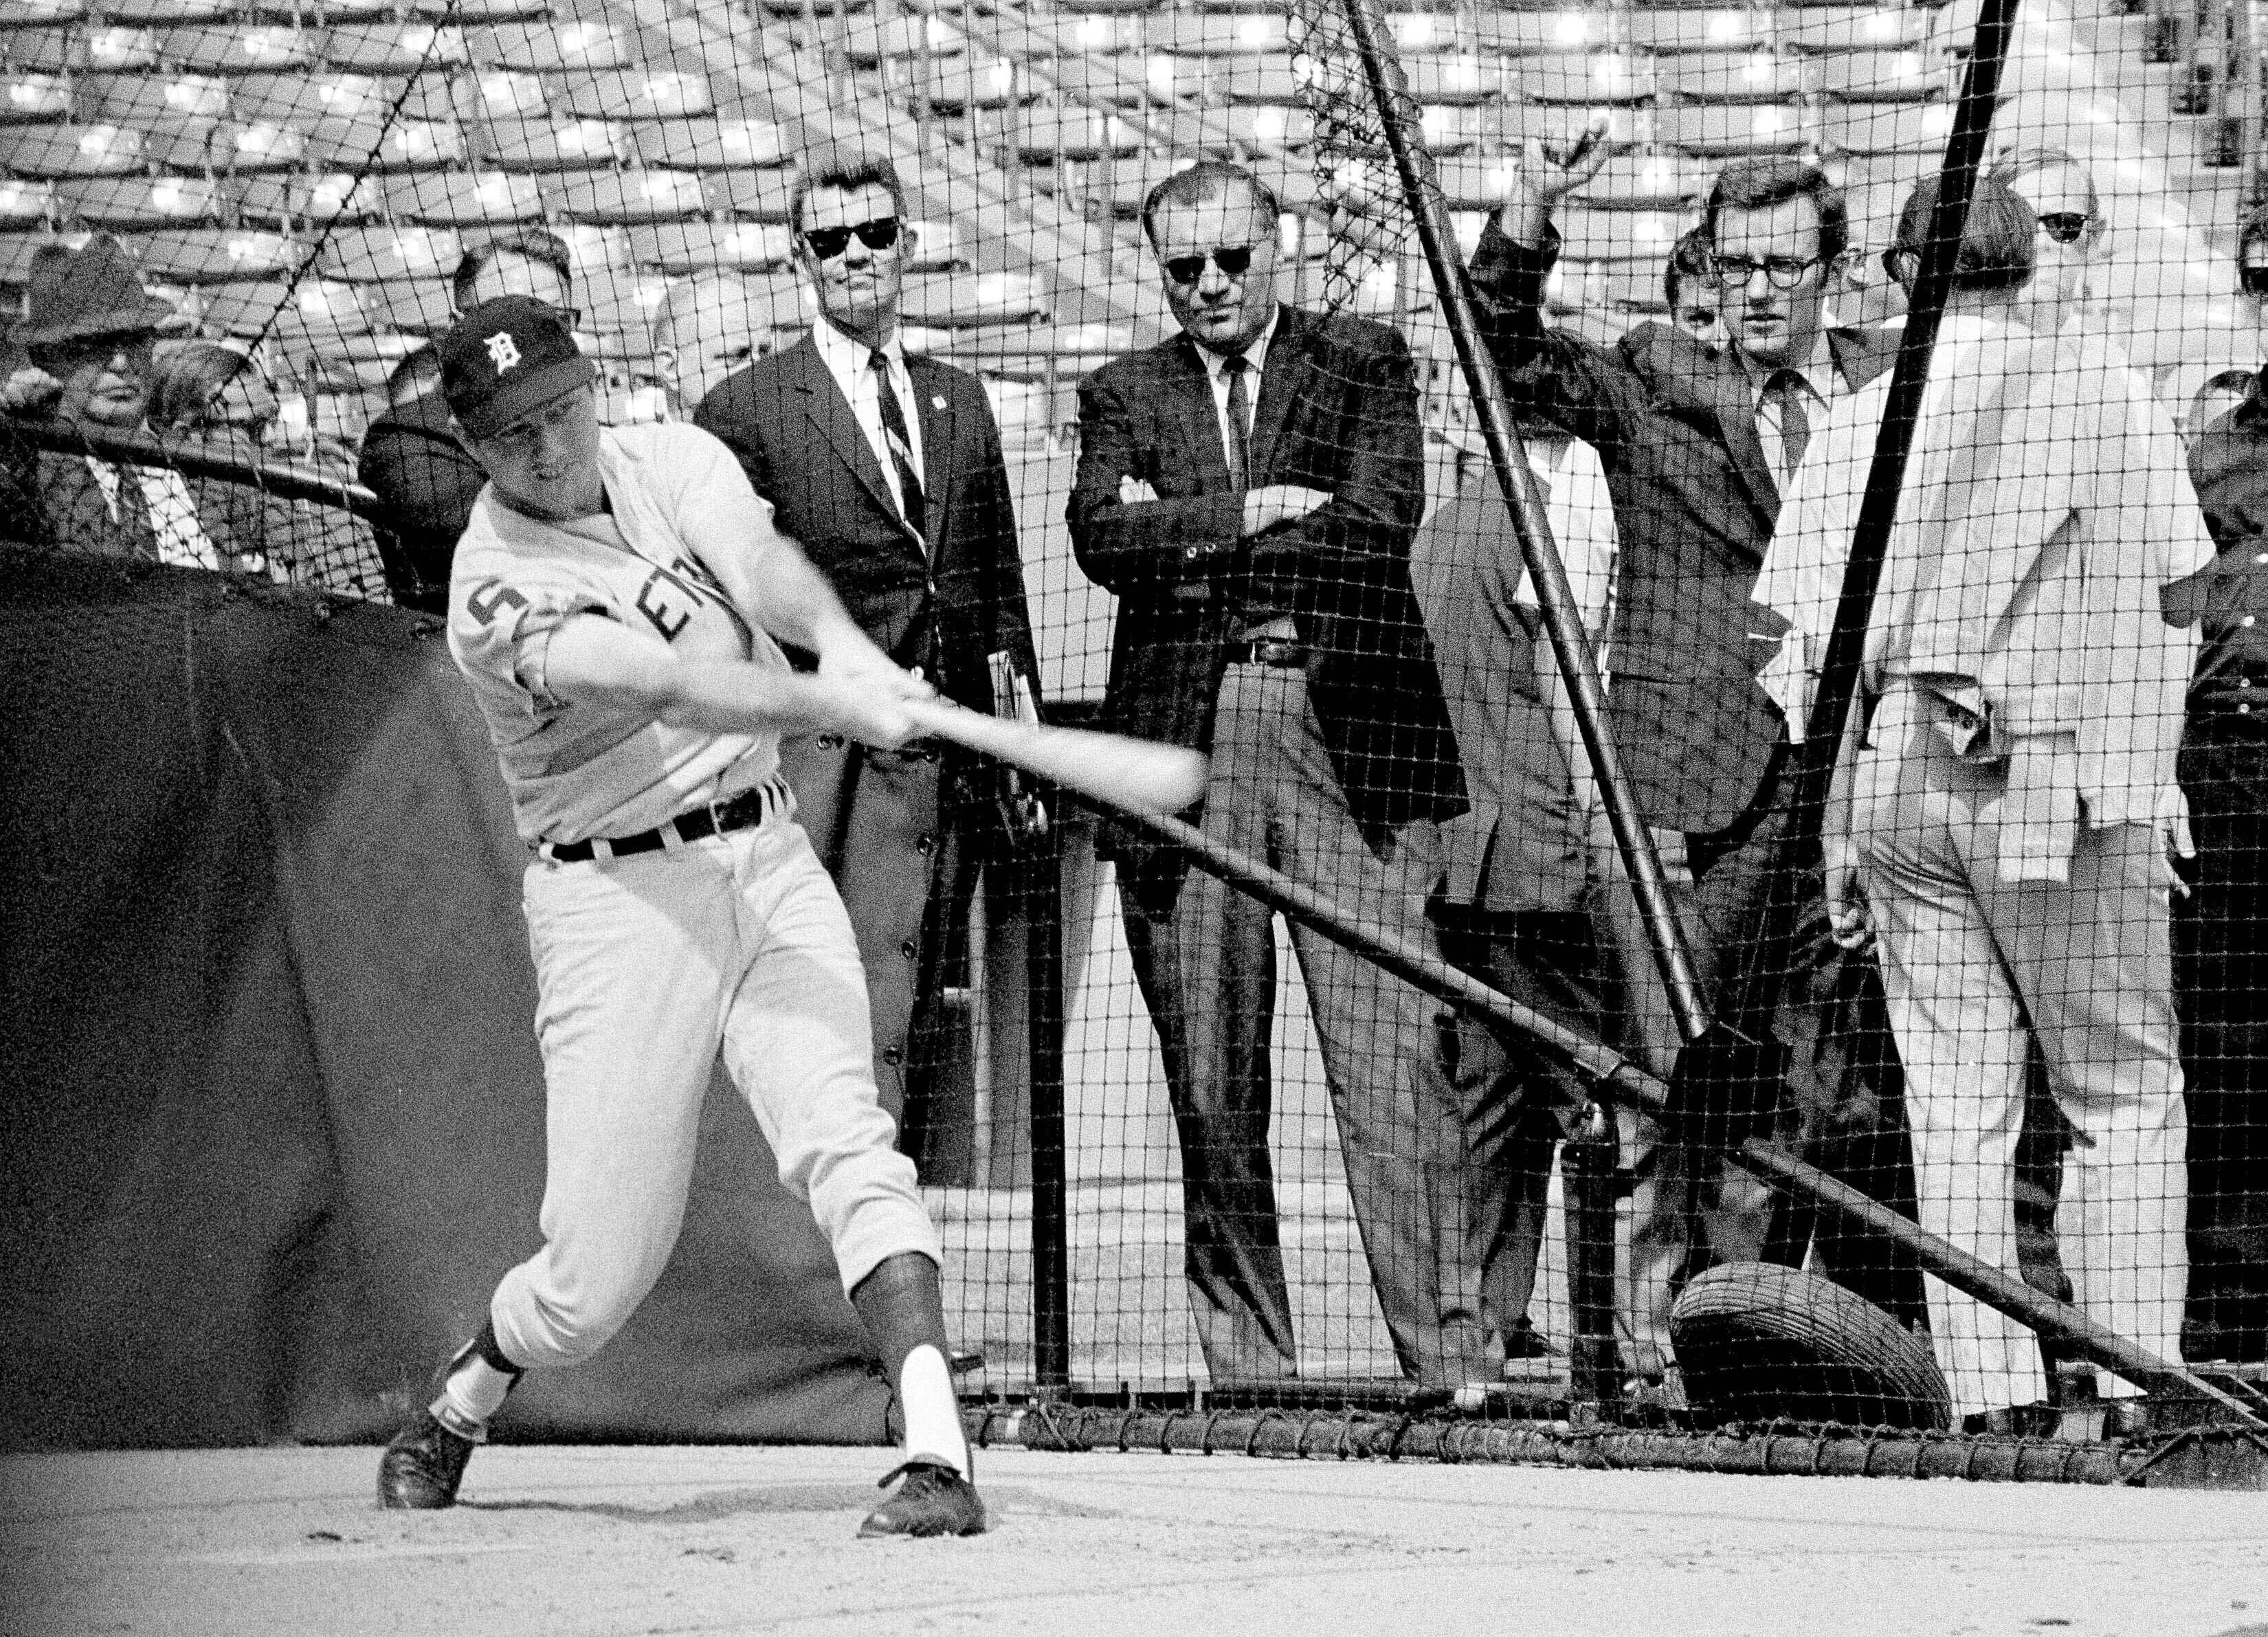 Tigers outfielder Al Kaline swings away in the batting cage at Busch Stadium in St. Louis on Oct. 1, 1968, as he worked out for the World Series opener against the Cardinals.